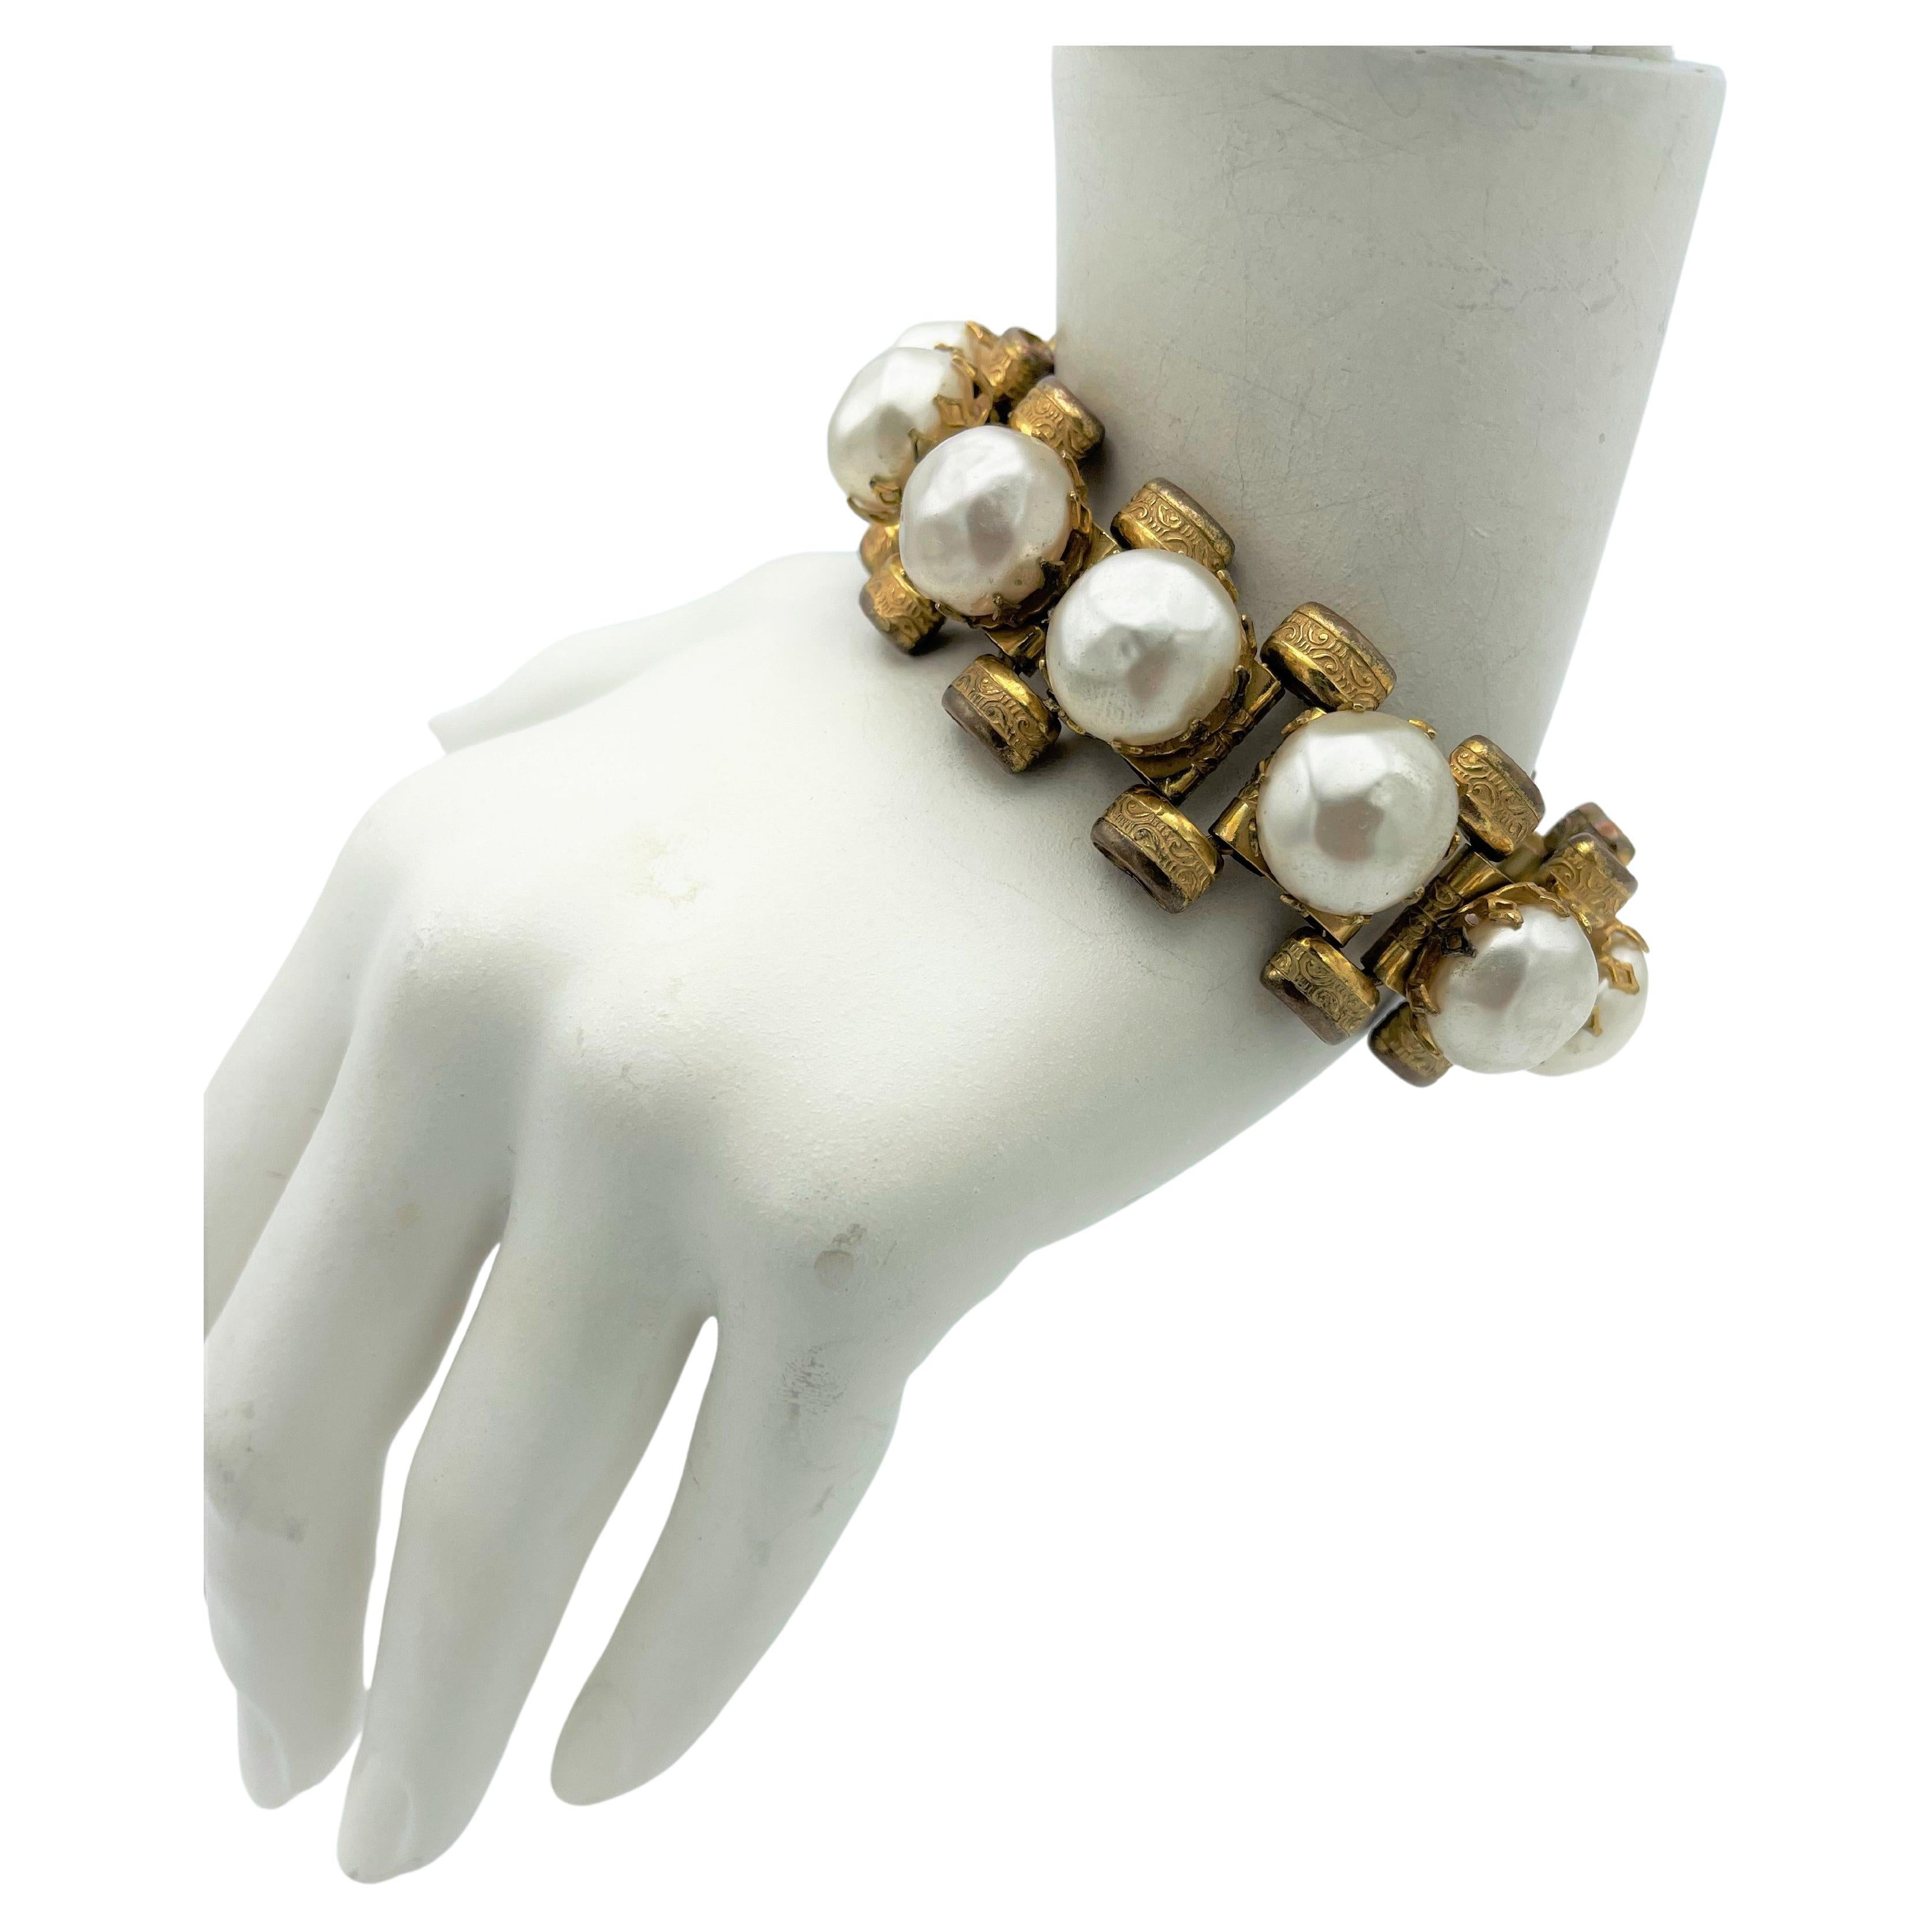 Vintage bracelet by Miriam Haskell USA, large false baroque pearls, 1950s 